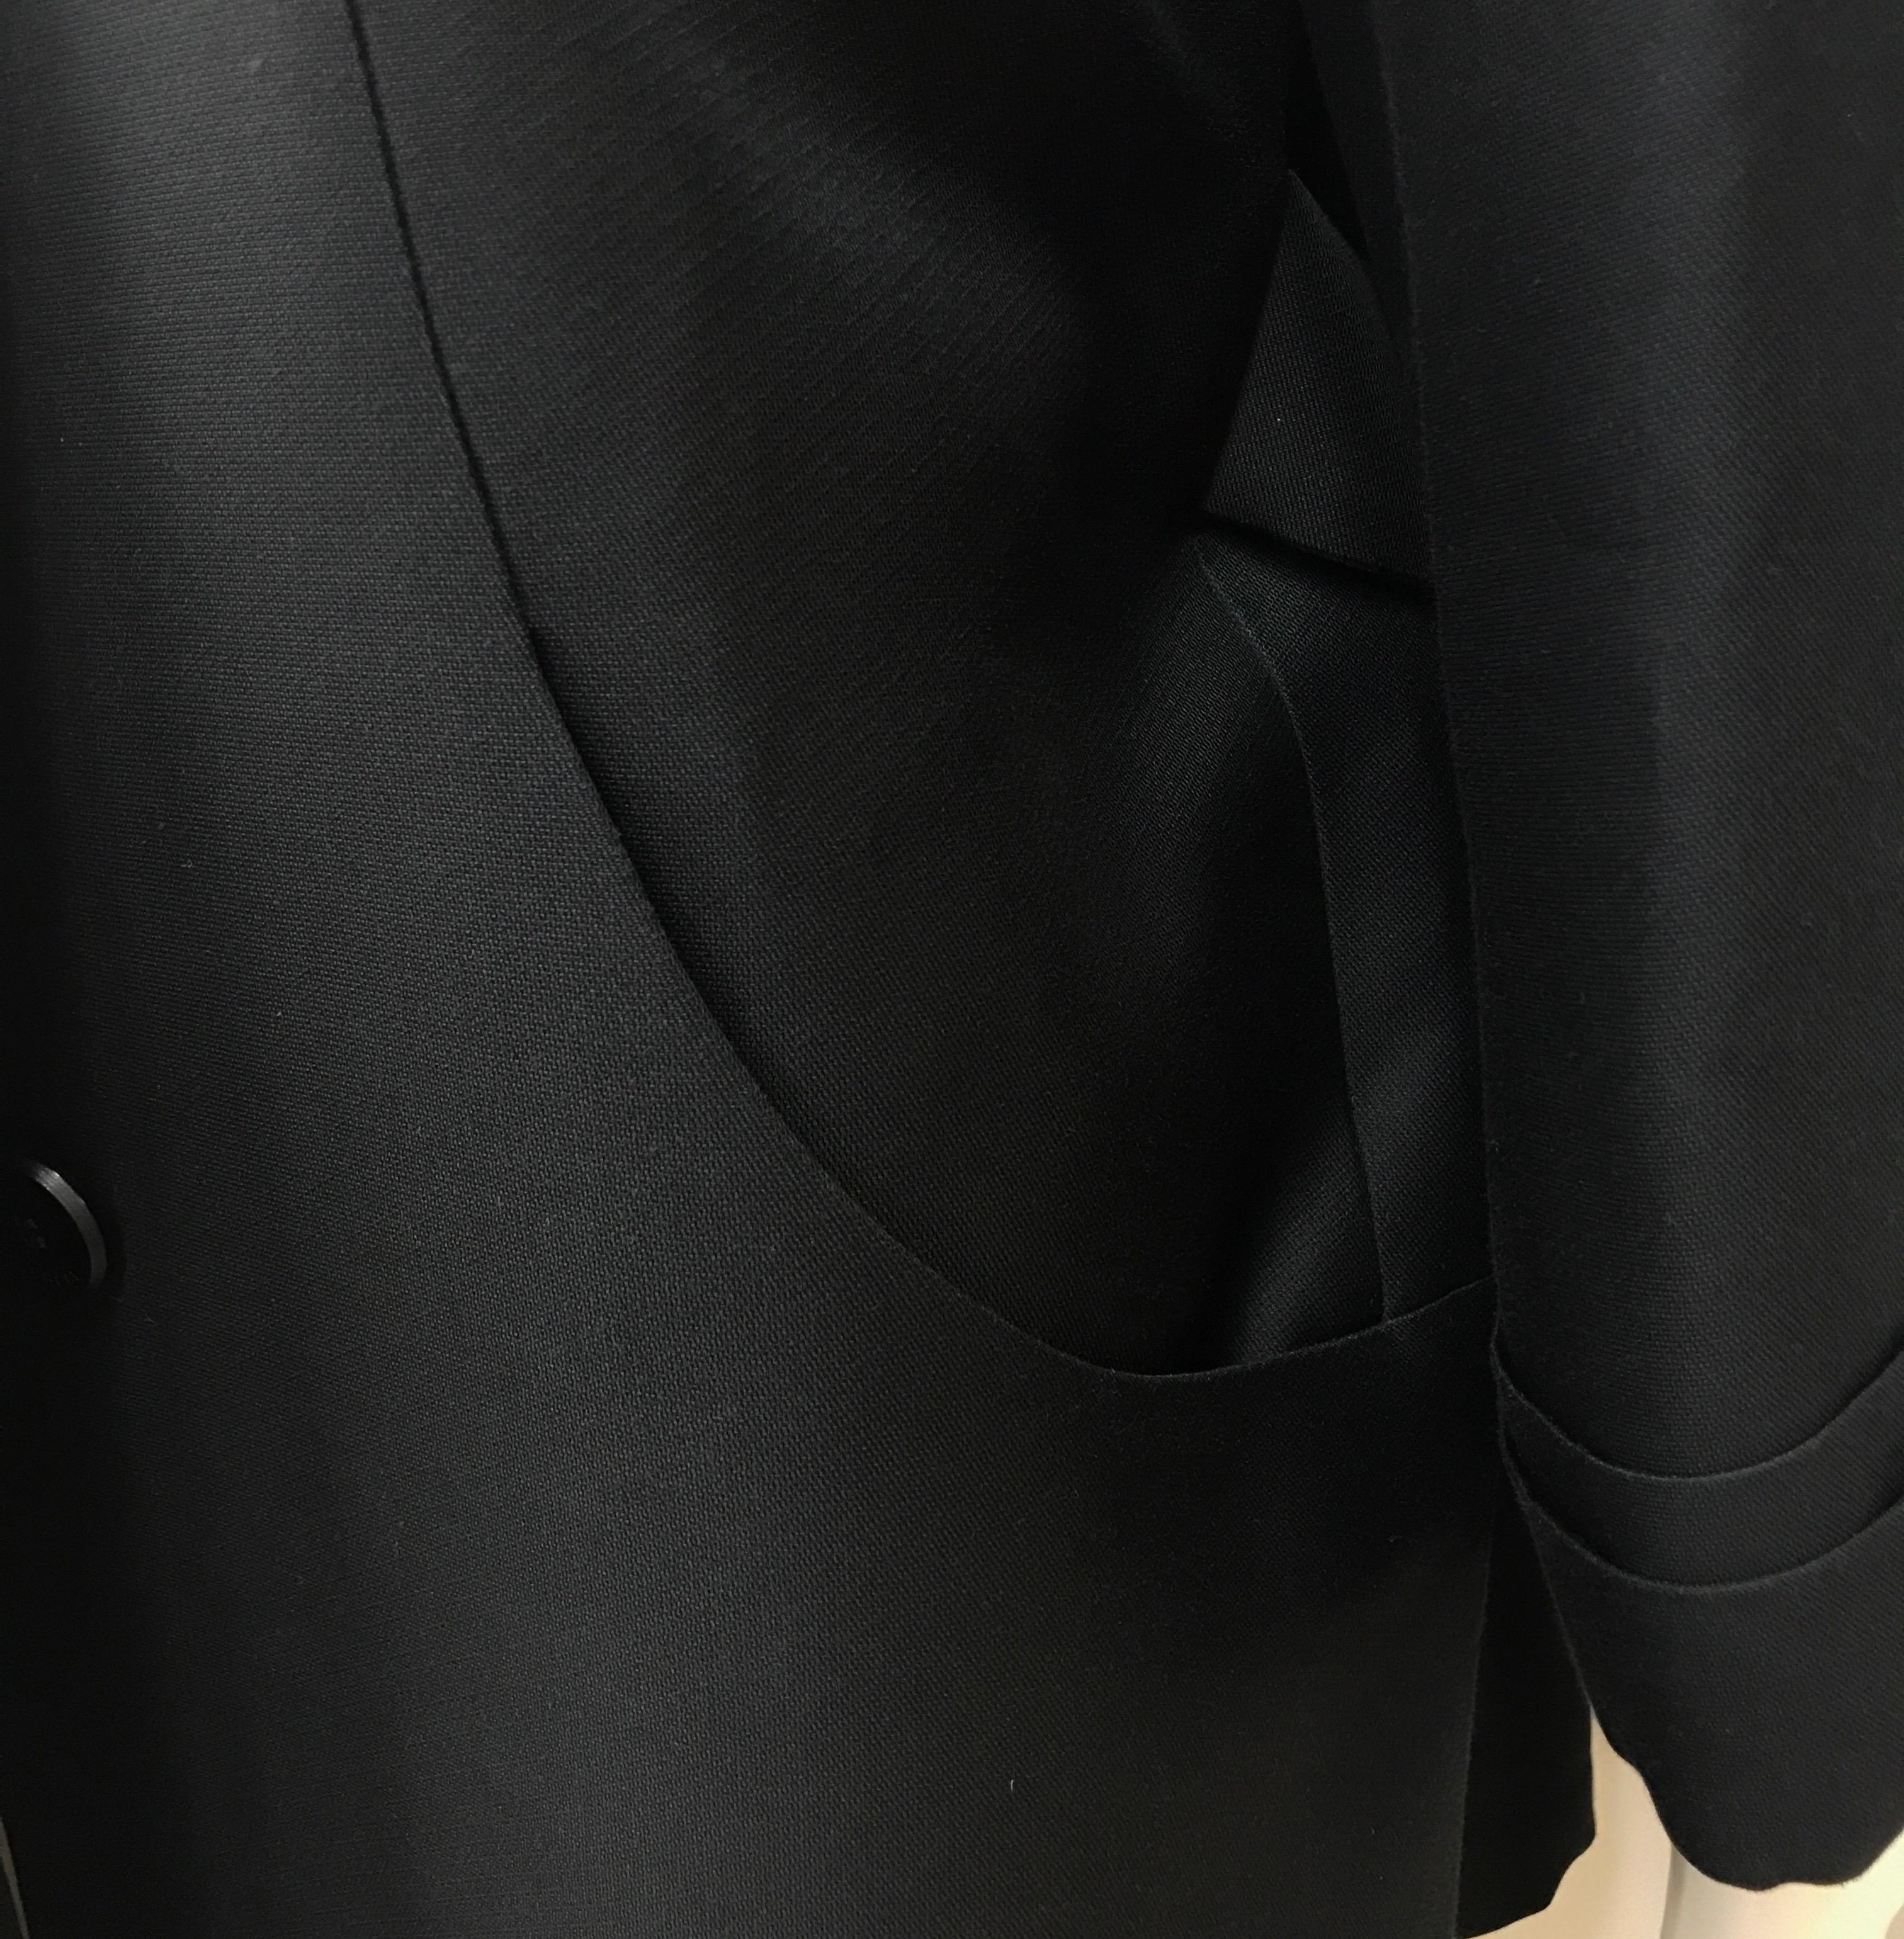 Gucci Black Silk Cape Jacket-42 In Good Condition For Sale In West Palm Beach, FL